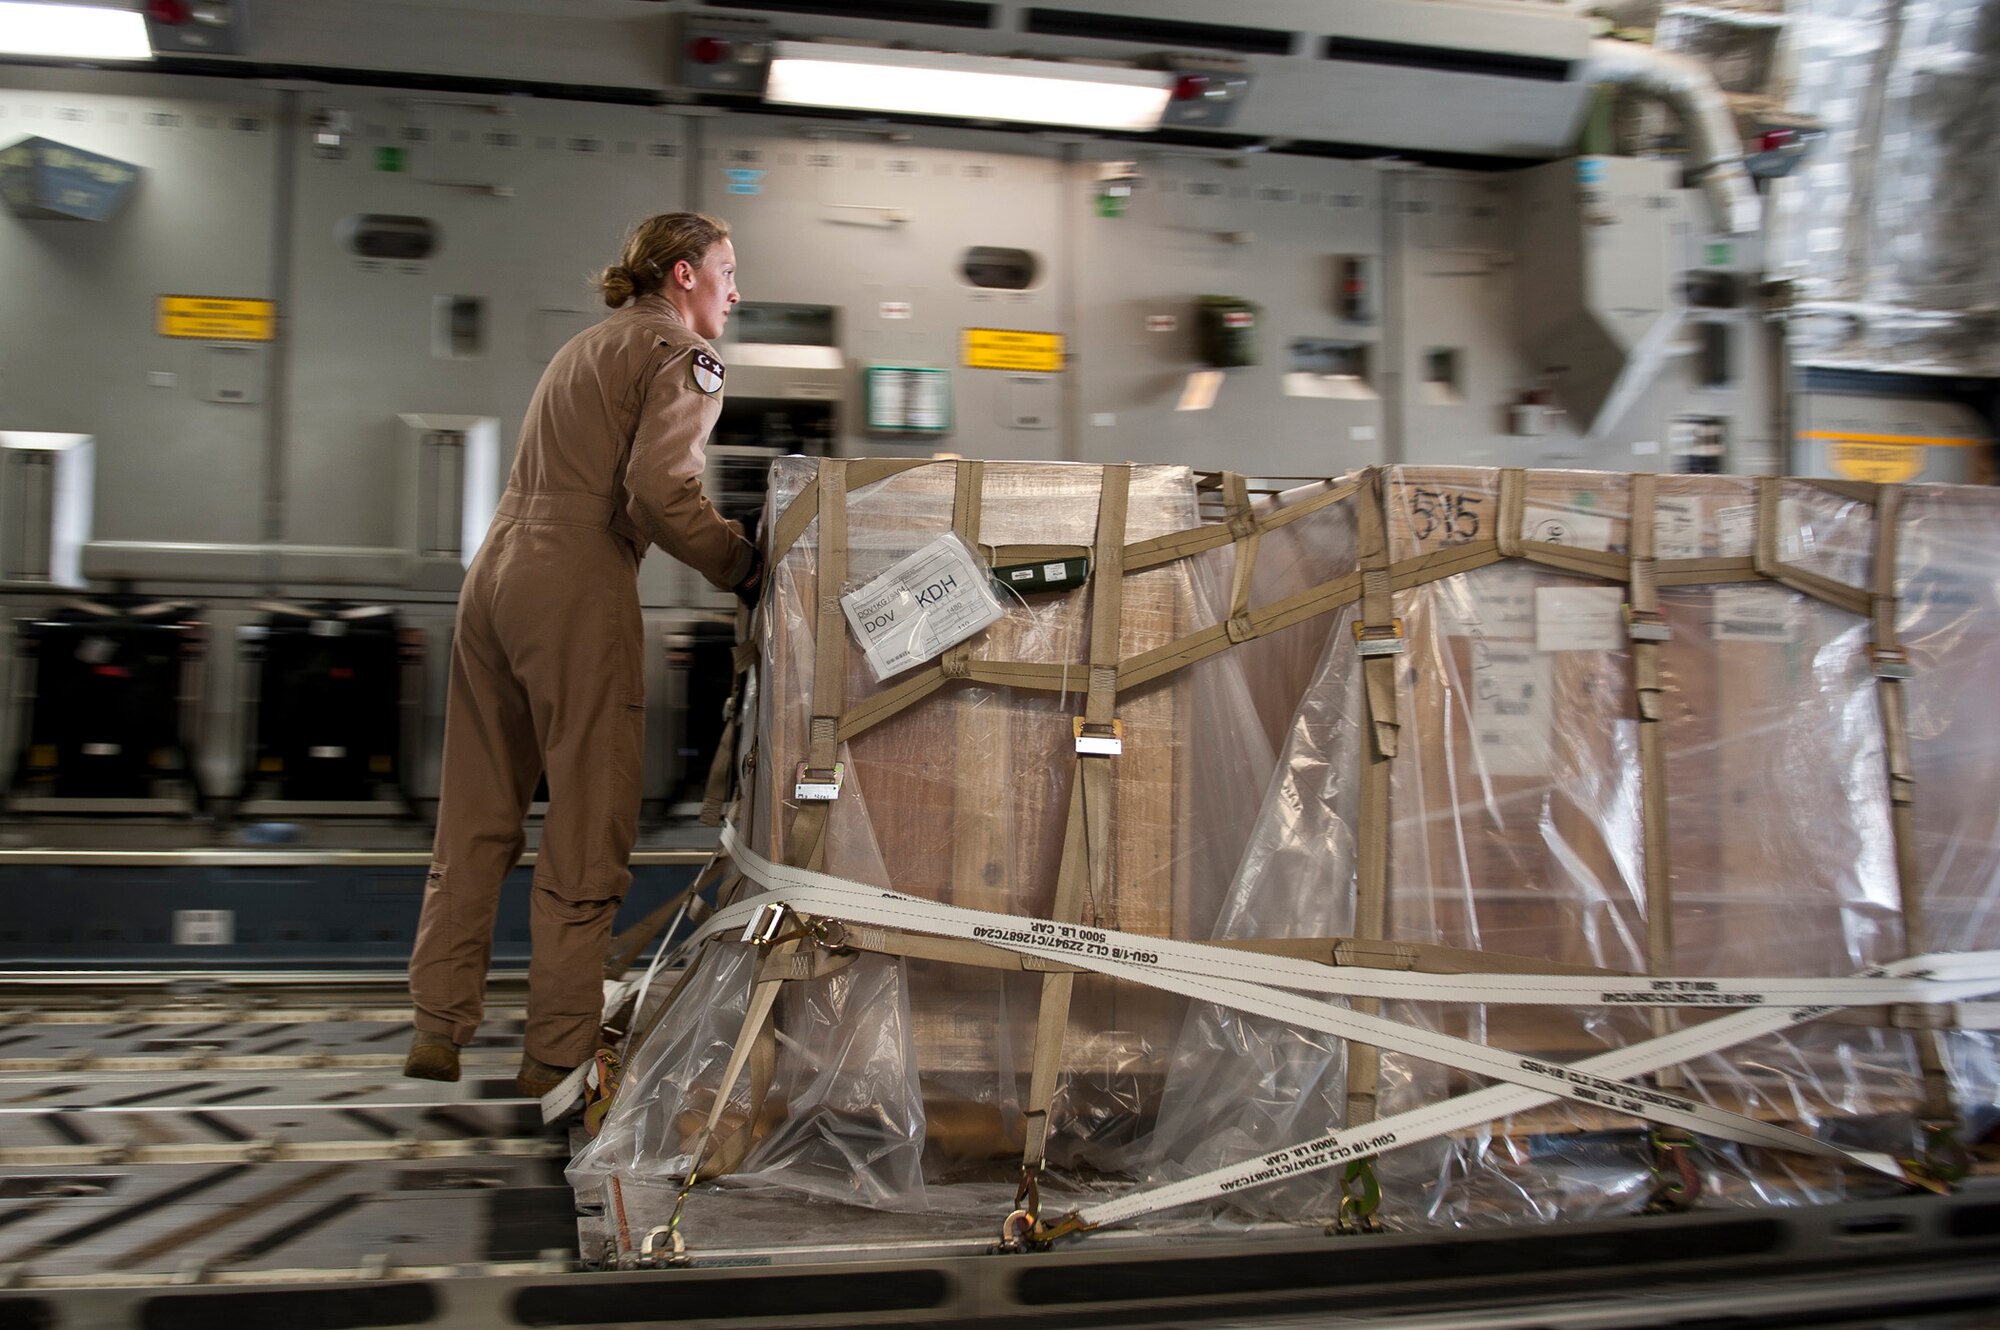 Staff Sgt. Melissa Butterfield, an 817th Expeditionary Airlift Squadron loadmaster, pushes a pallet of cargo while unloading a C-17 Globemaster III aircraft Aug. 18, 2011, at Kandahar Air Field, Afghanistan, during a mission to transport equipment and supplies from Incirlik Air Base, Turkey. Loadmasters not only ensure the cargo is properly secured during flight, but also help with the unloading. (U.S. Air Force photo by Tech. Sgt. Michael B. Keller/Released)